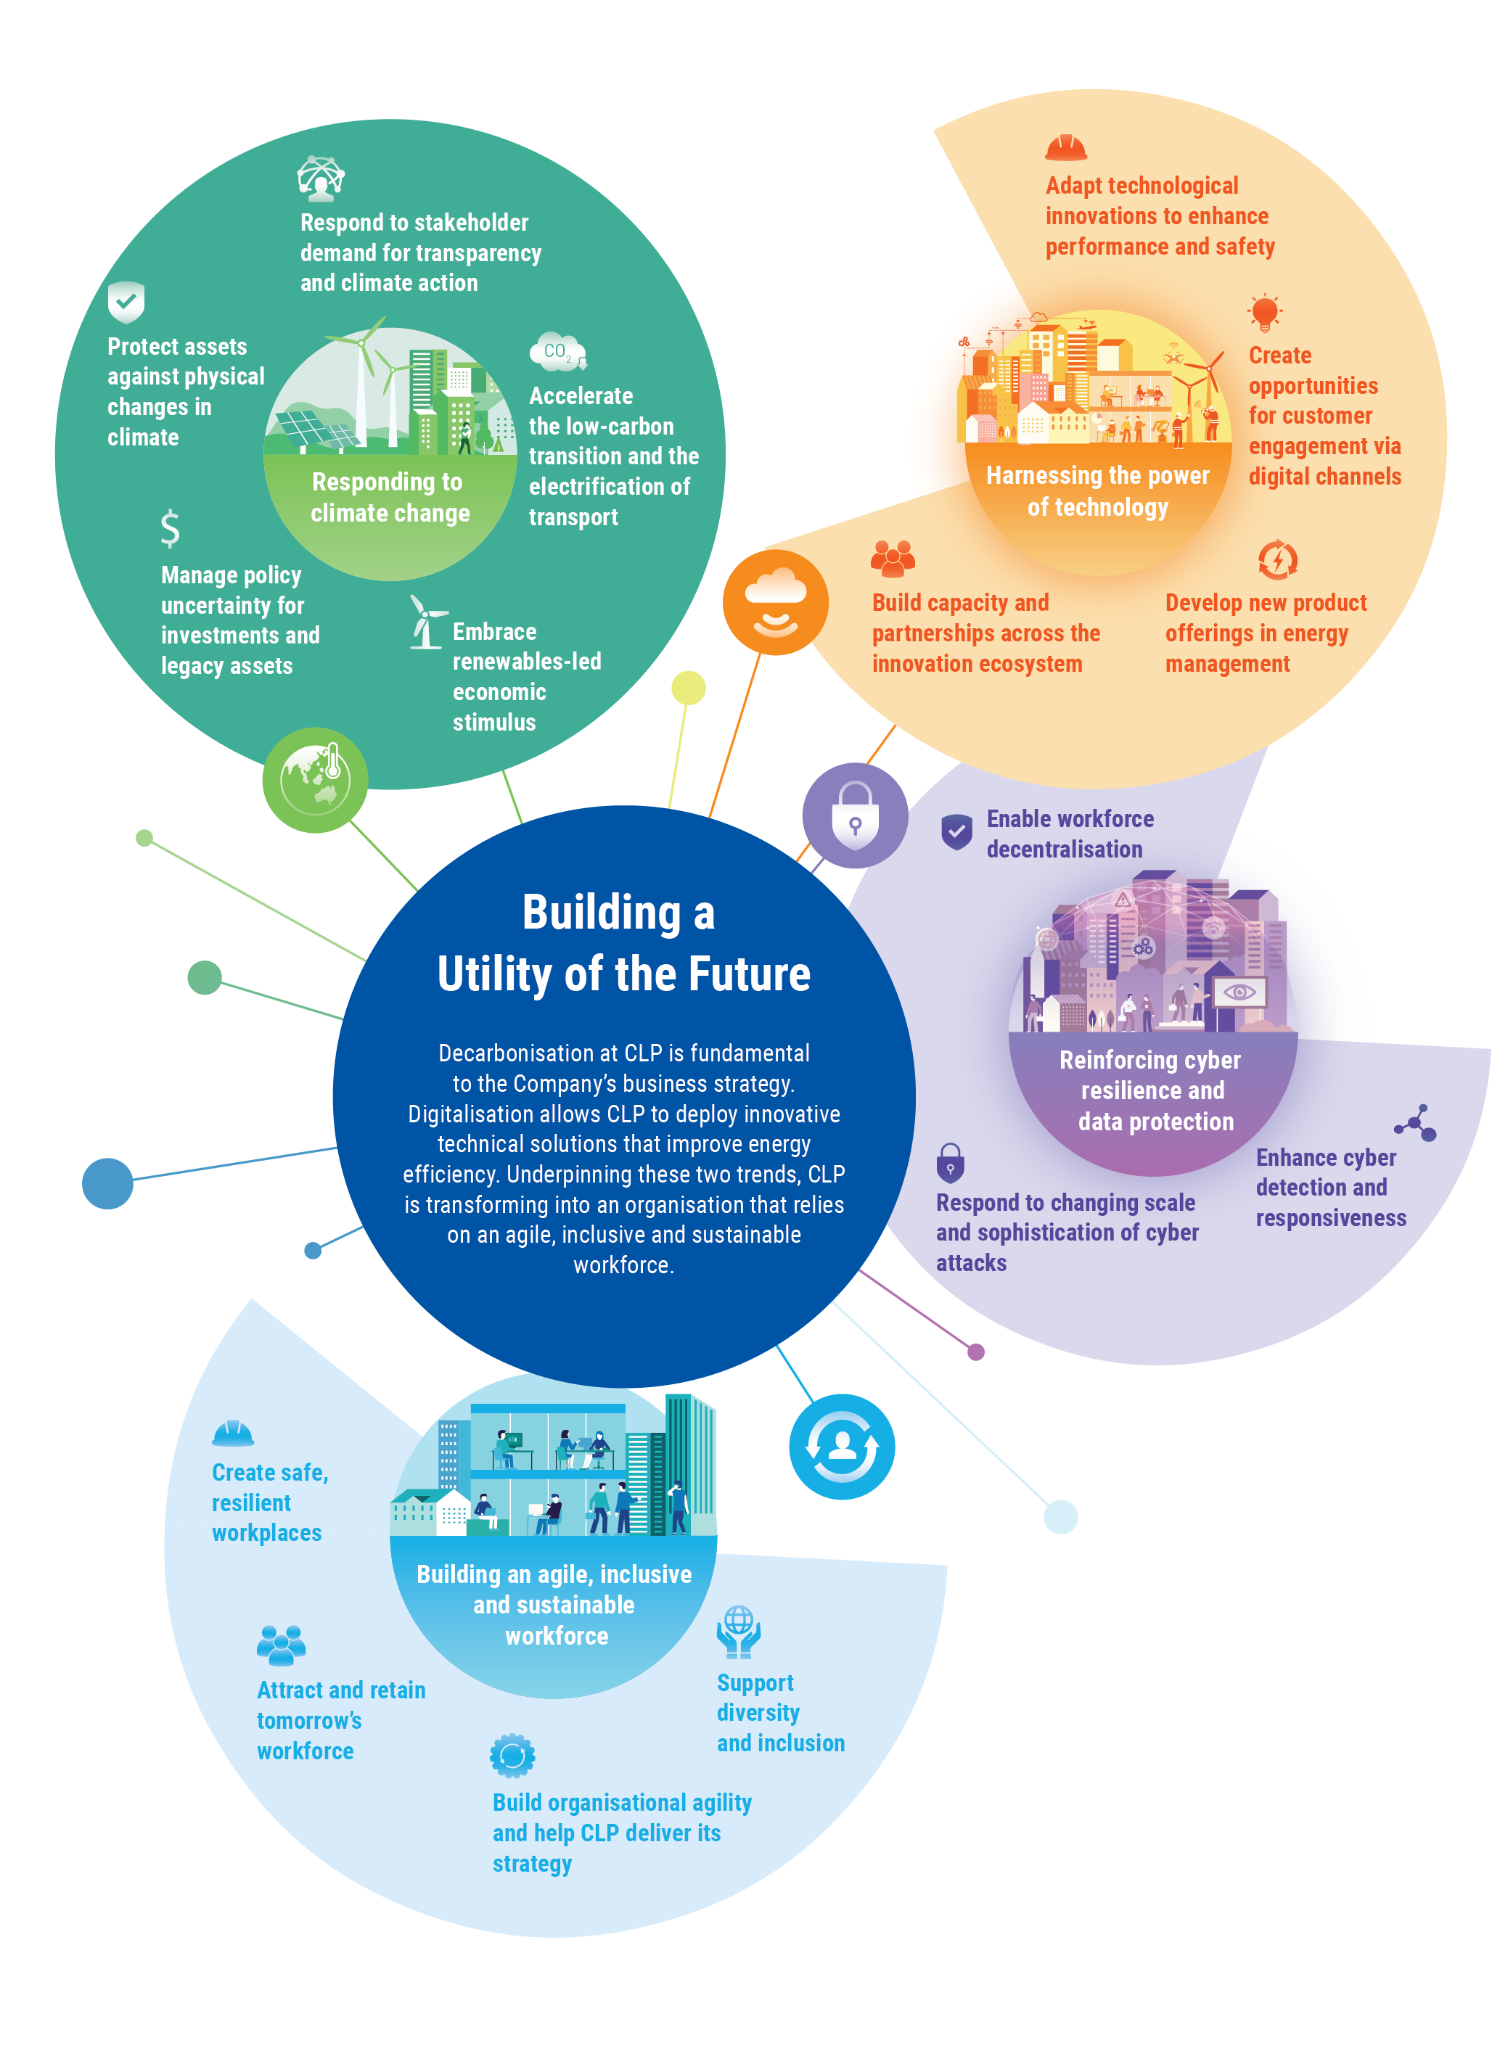 Building a utility of the future